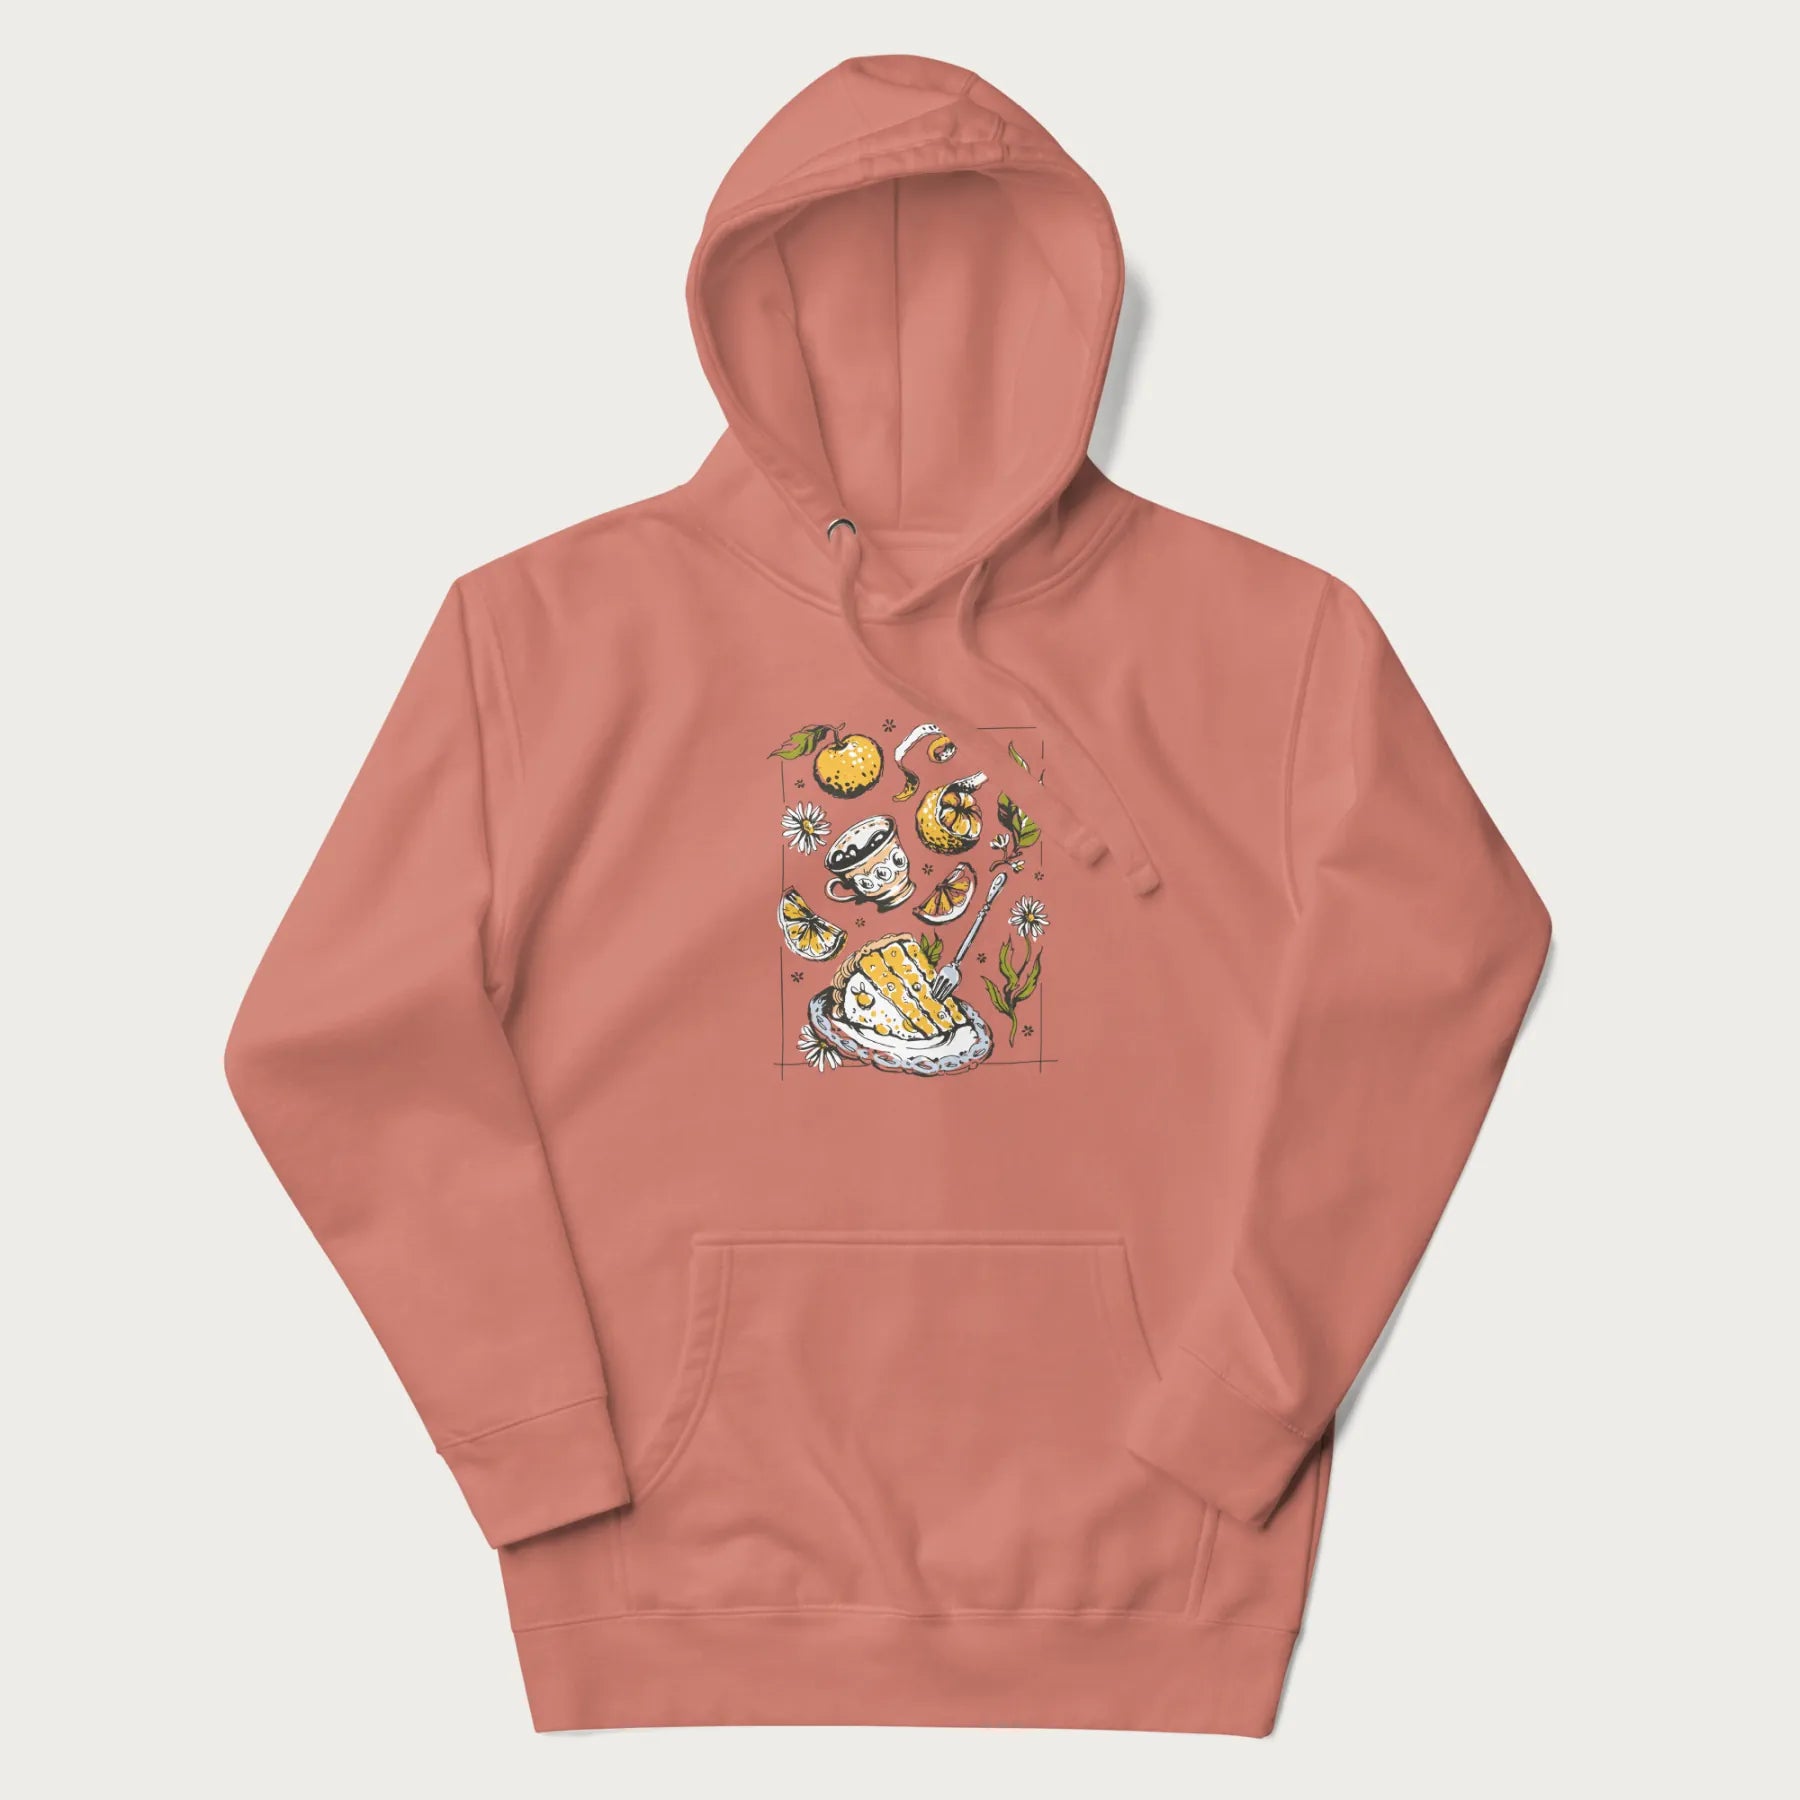 Light pink hoodie featuring a Cottagecore-themed graphic with oranges, a floral porcelain cup, orange pie, and daisies.